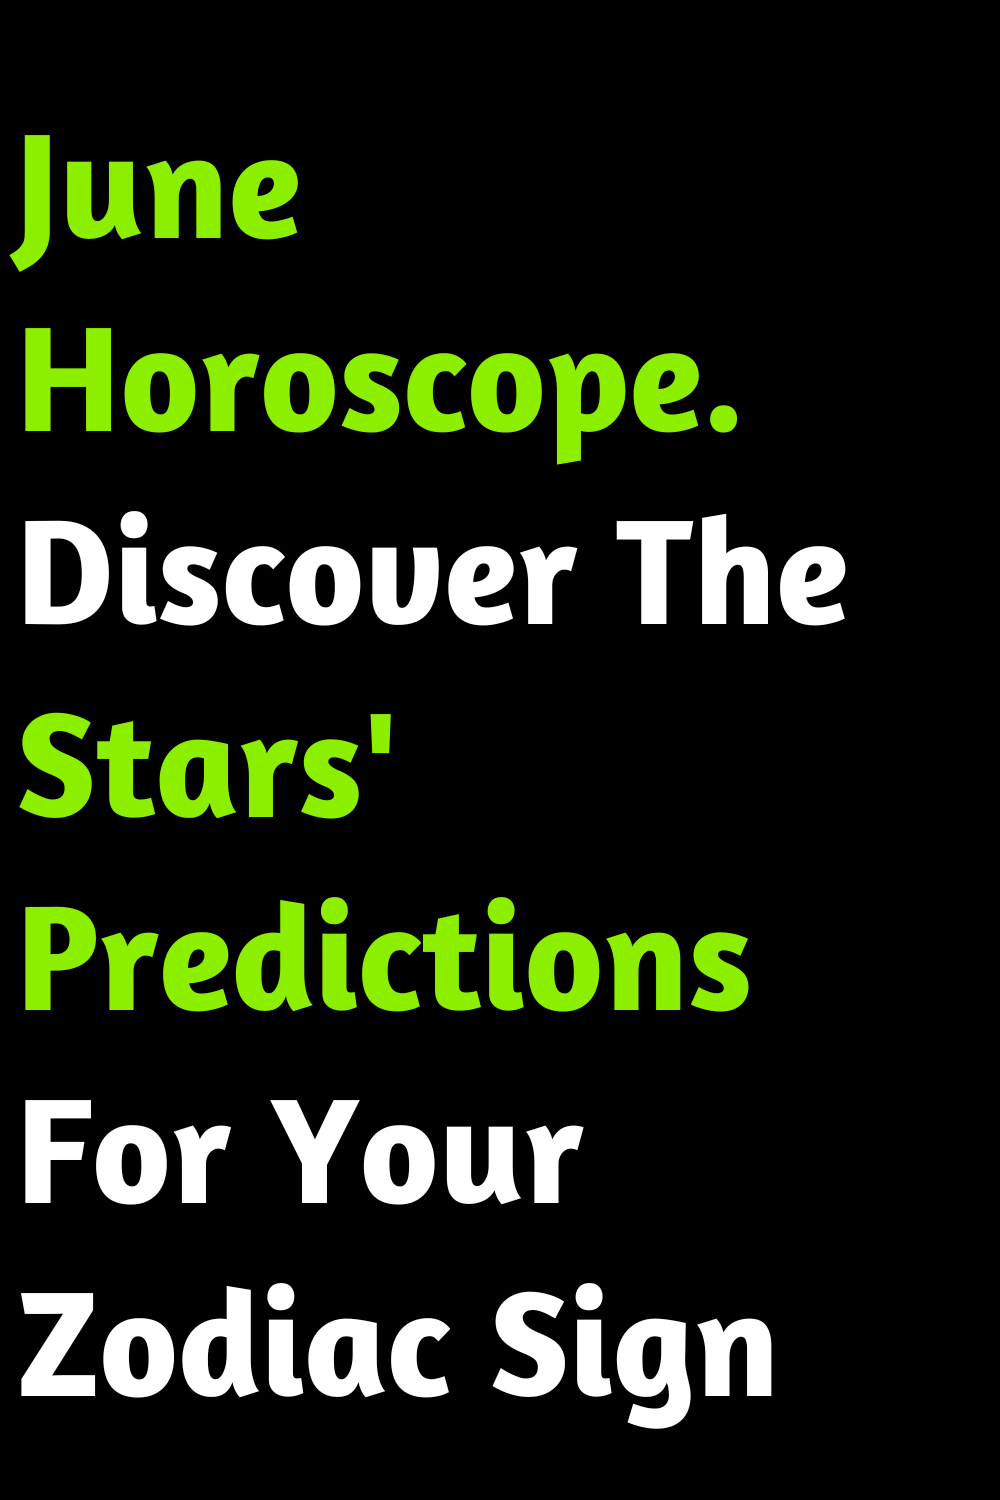 June Horoscope. Discover The Stars' Predictions For Your Zodiac Sign